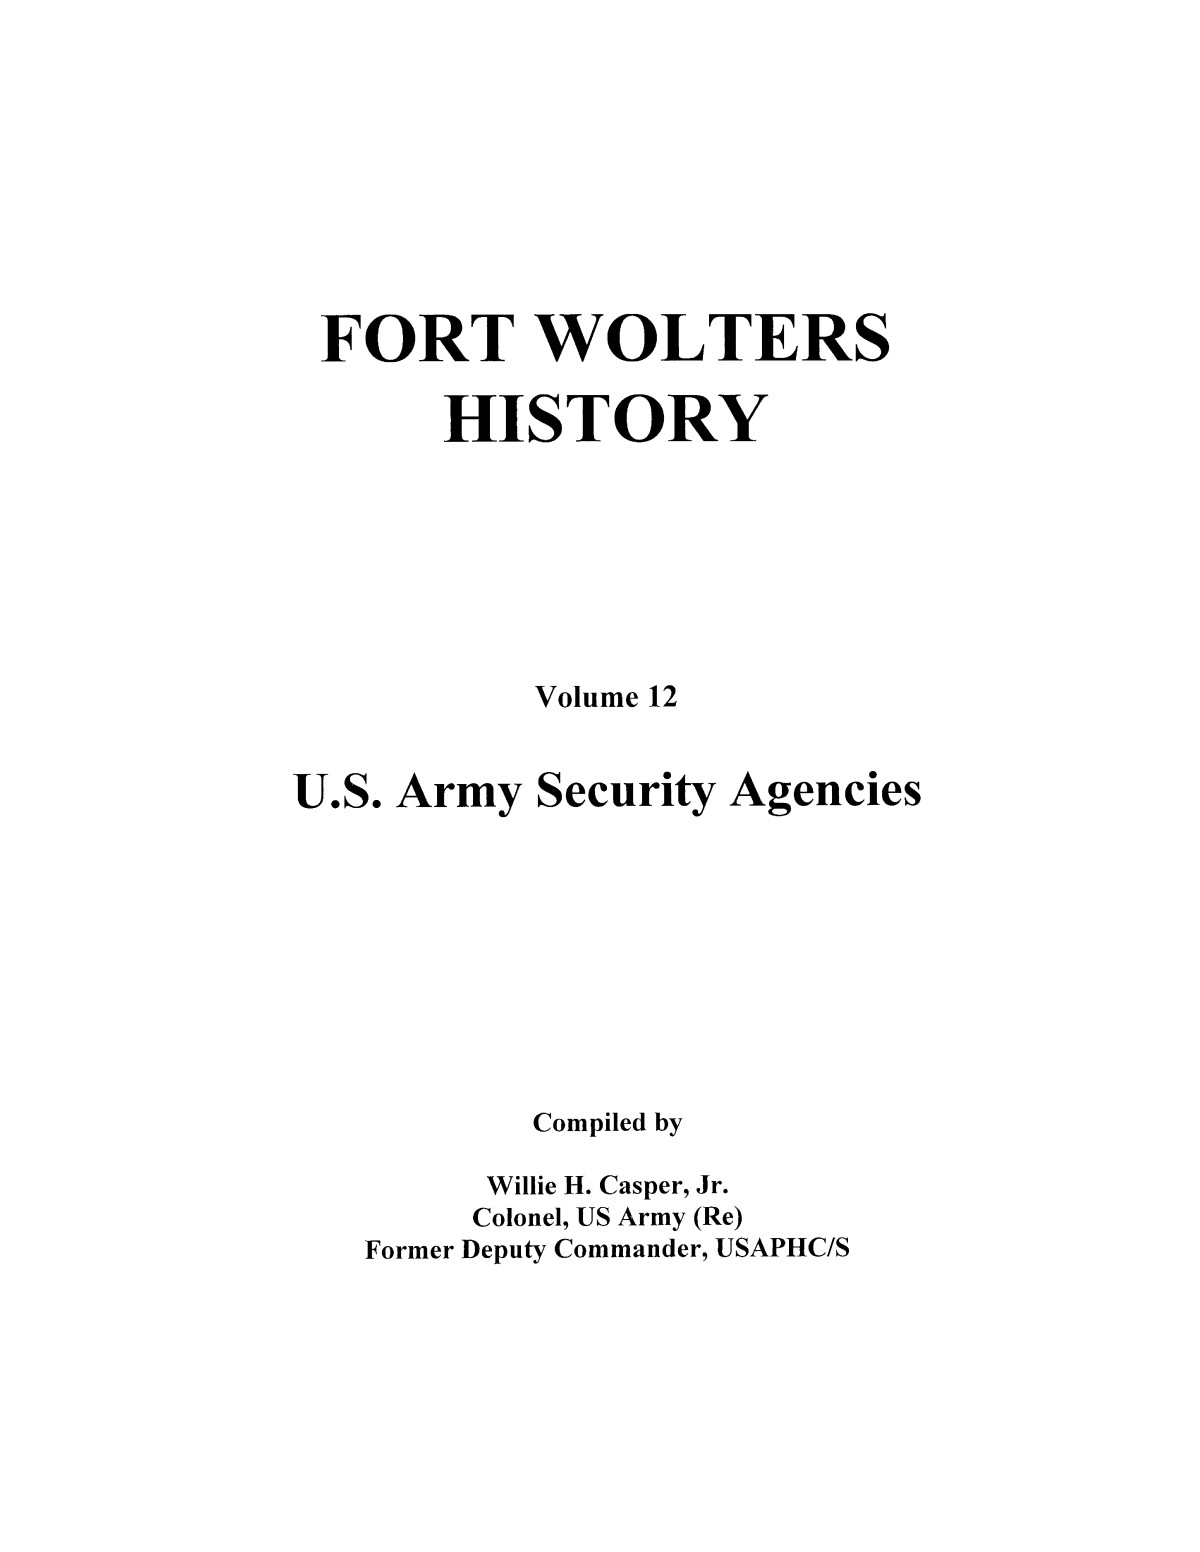 Pictorial History of Fort Wolters, Volume 12: U.S. Army Security Agencies
                                                
                                                    [Sequence #]: 1 of 163
                                                